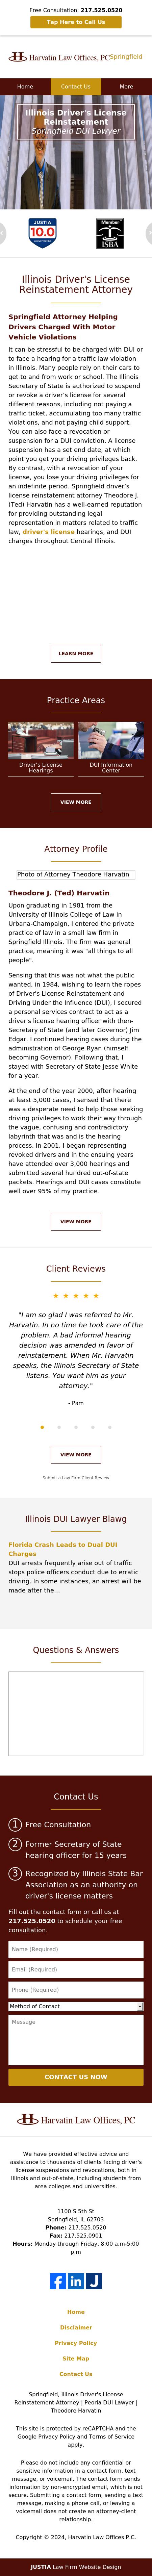 Harvatin Law Offices - Springfield IL Lawyers